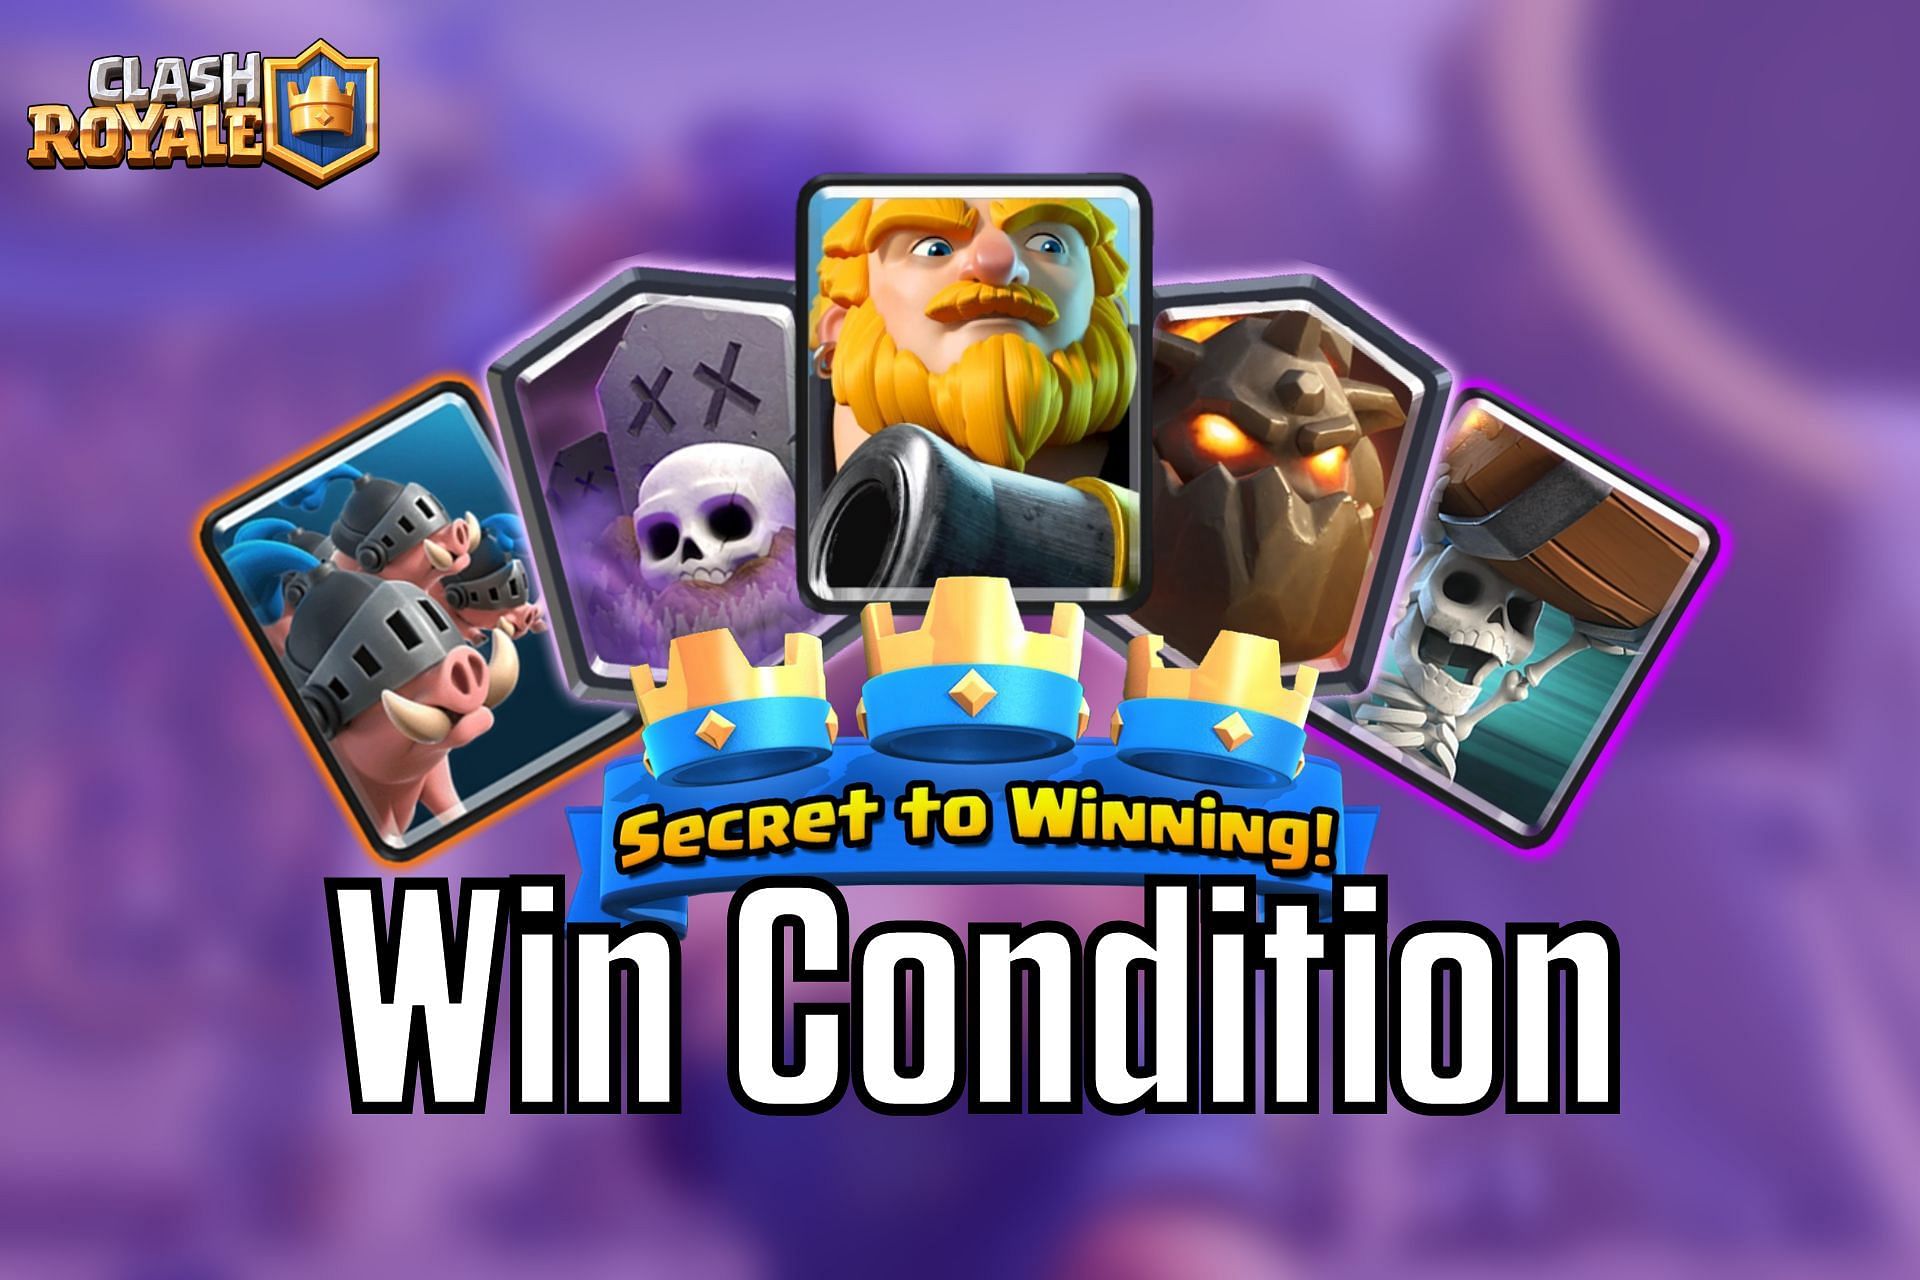 What is a win condition in Clash Royale?